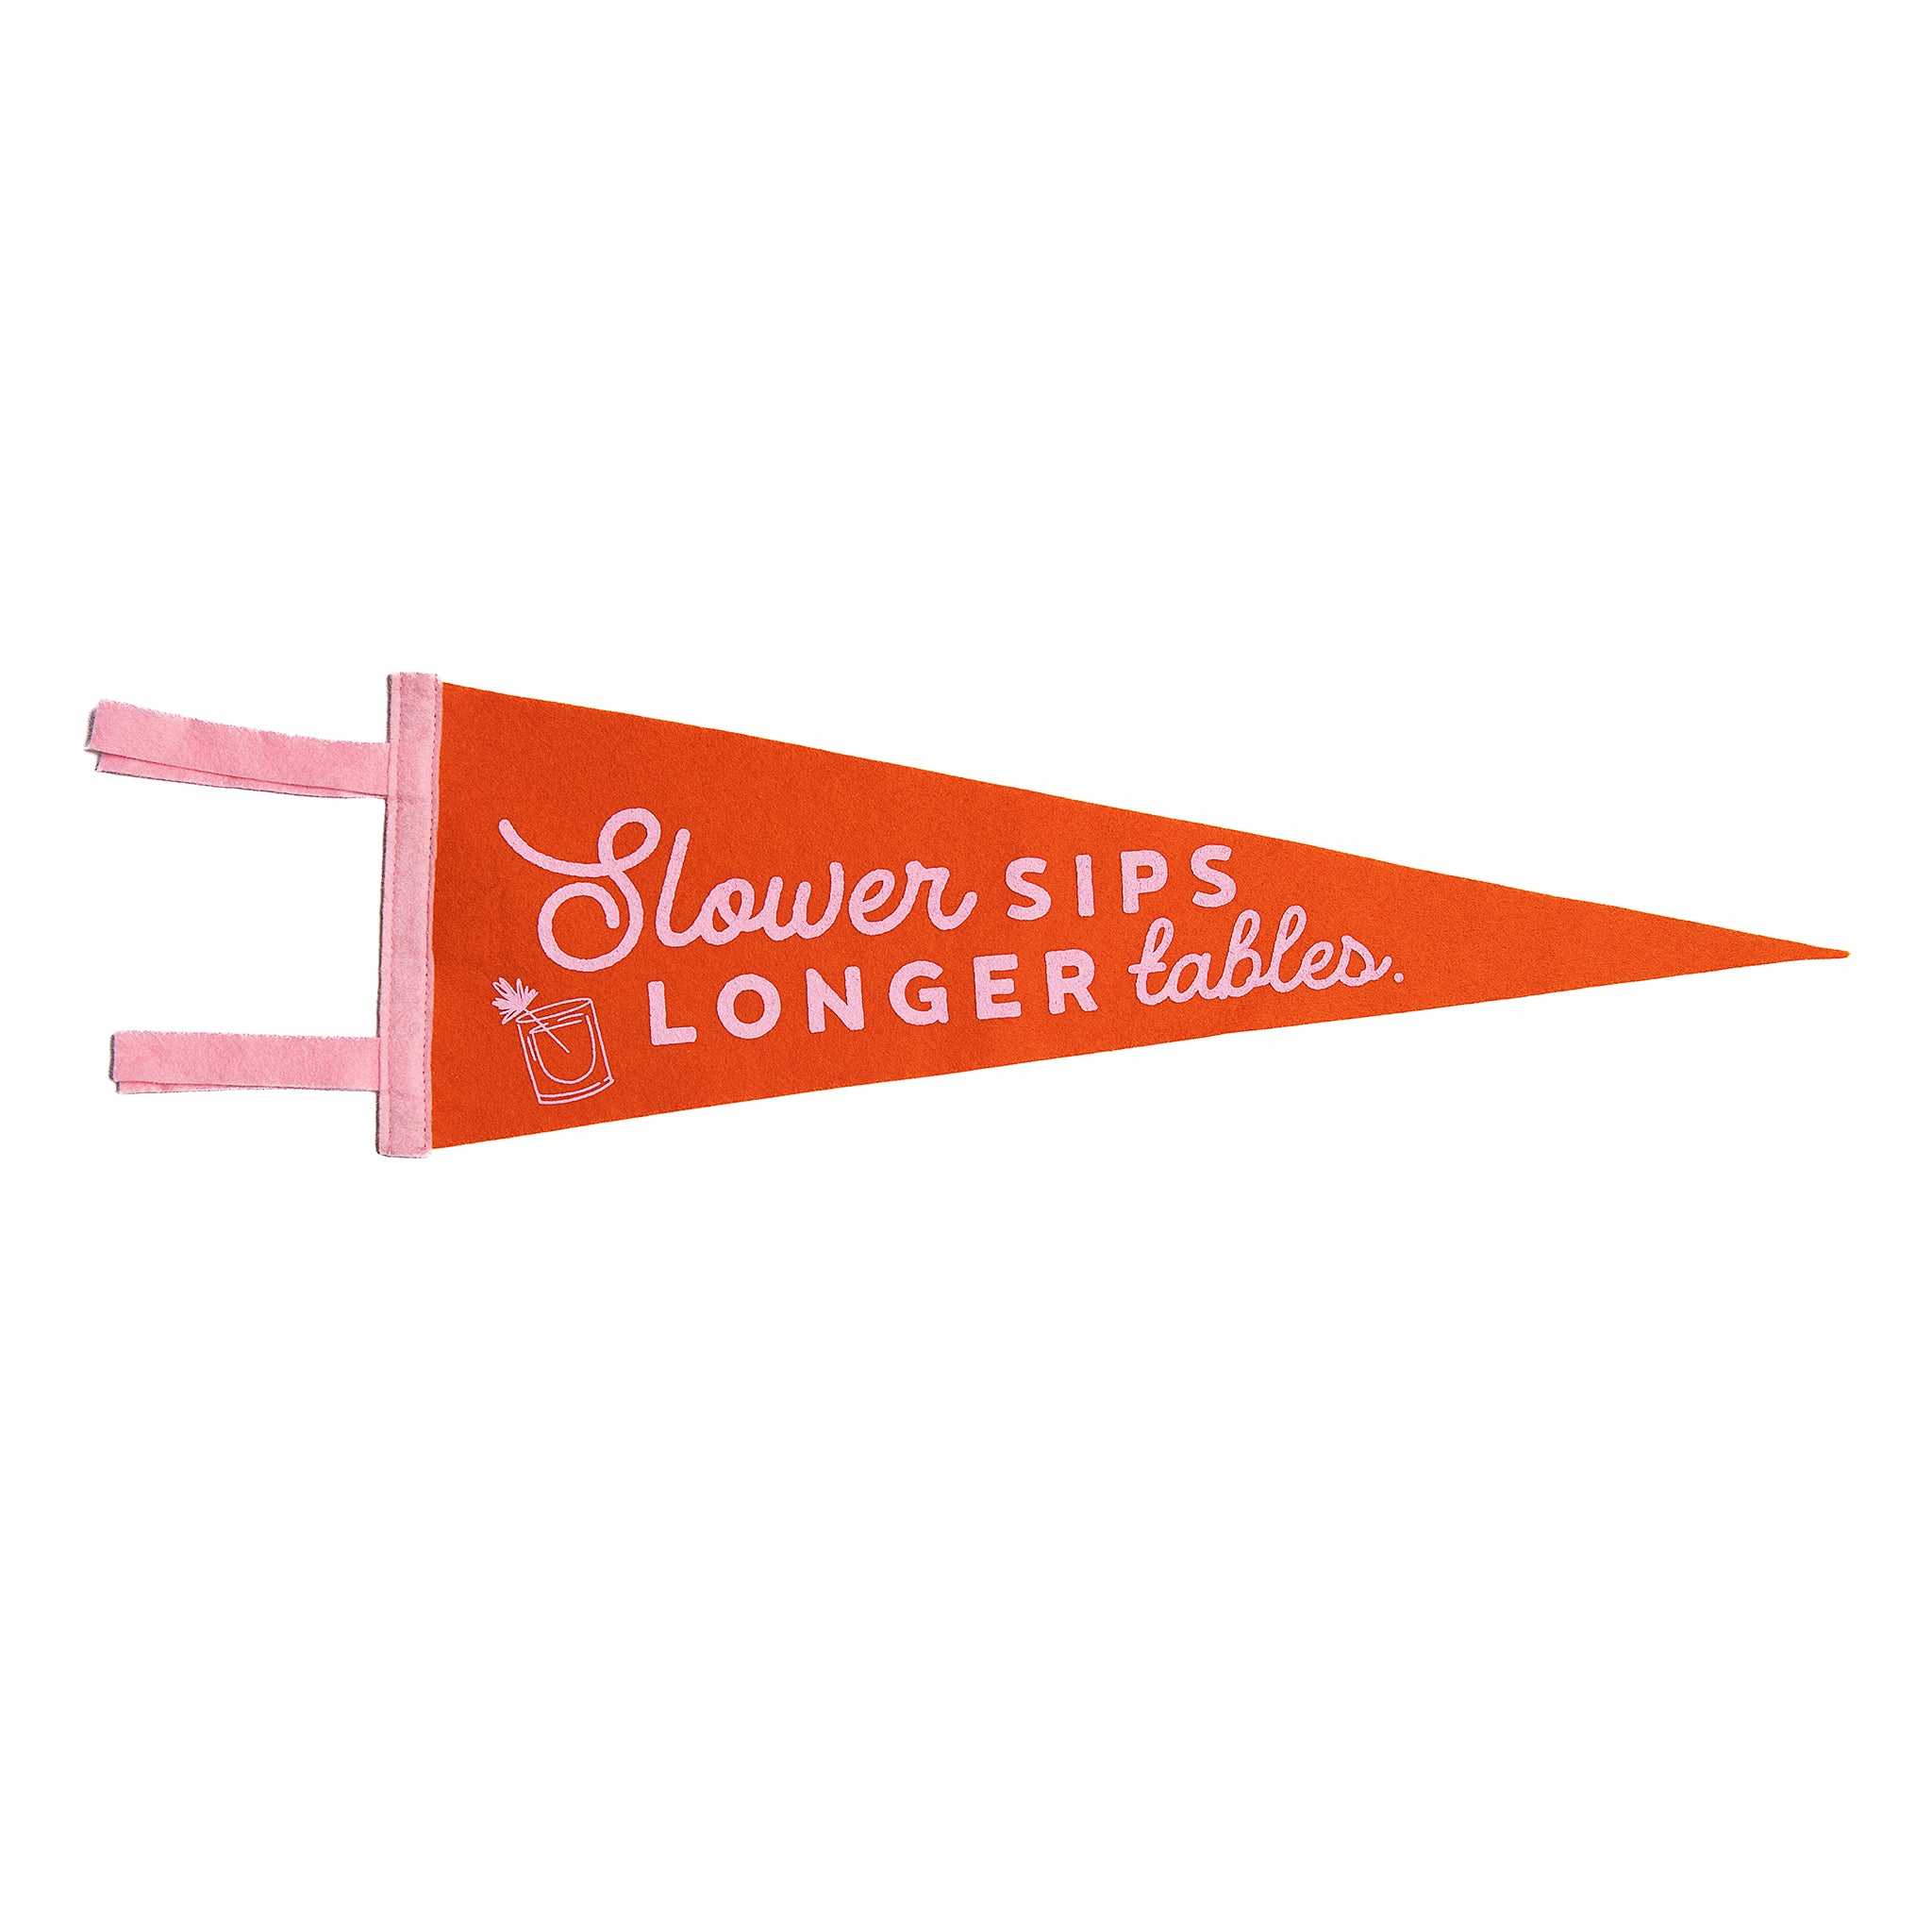 Sticky Tack – Eventide Pennant Co.